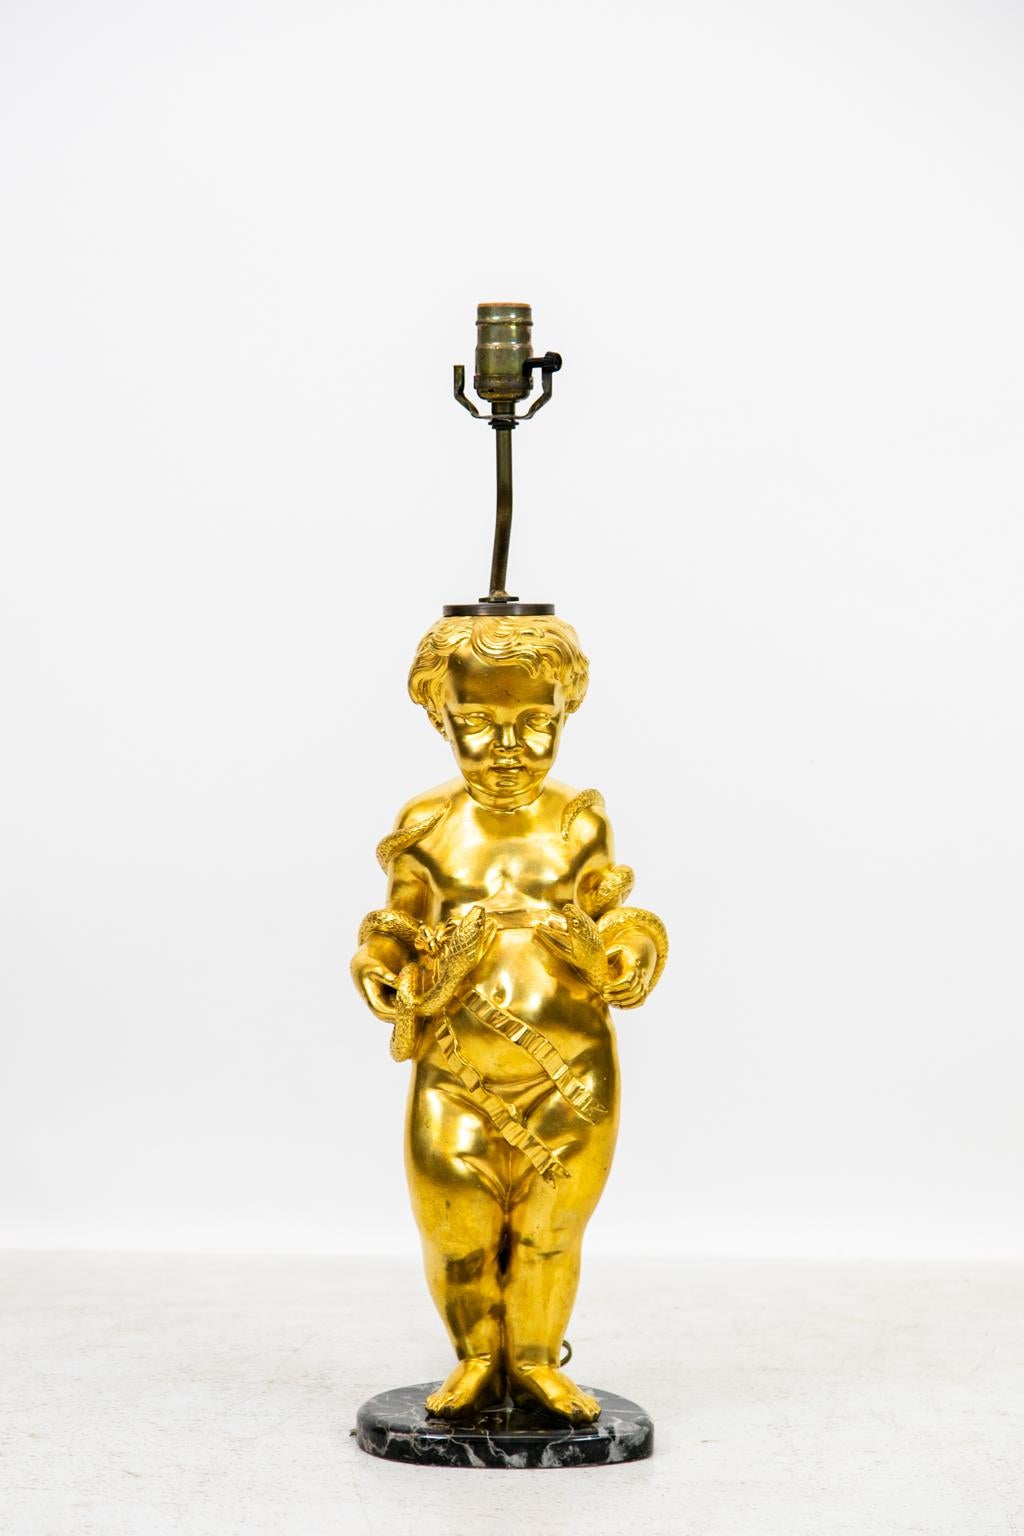 Gilt Cherub lamp holding serpents is on a marble base. It is wired for American use and weighs 24 pounds.    
  